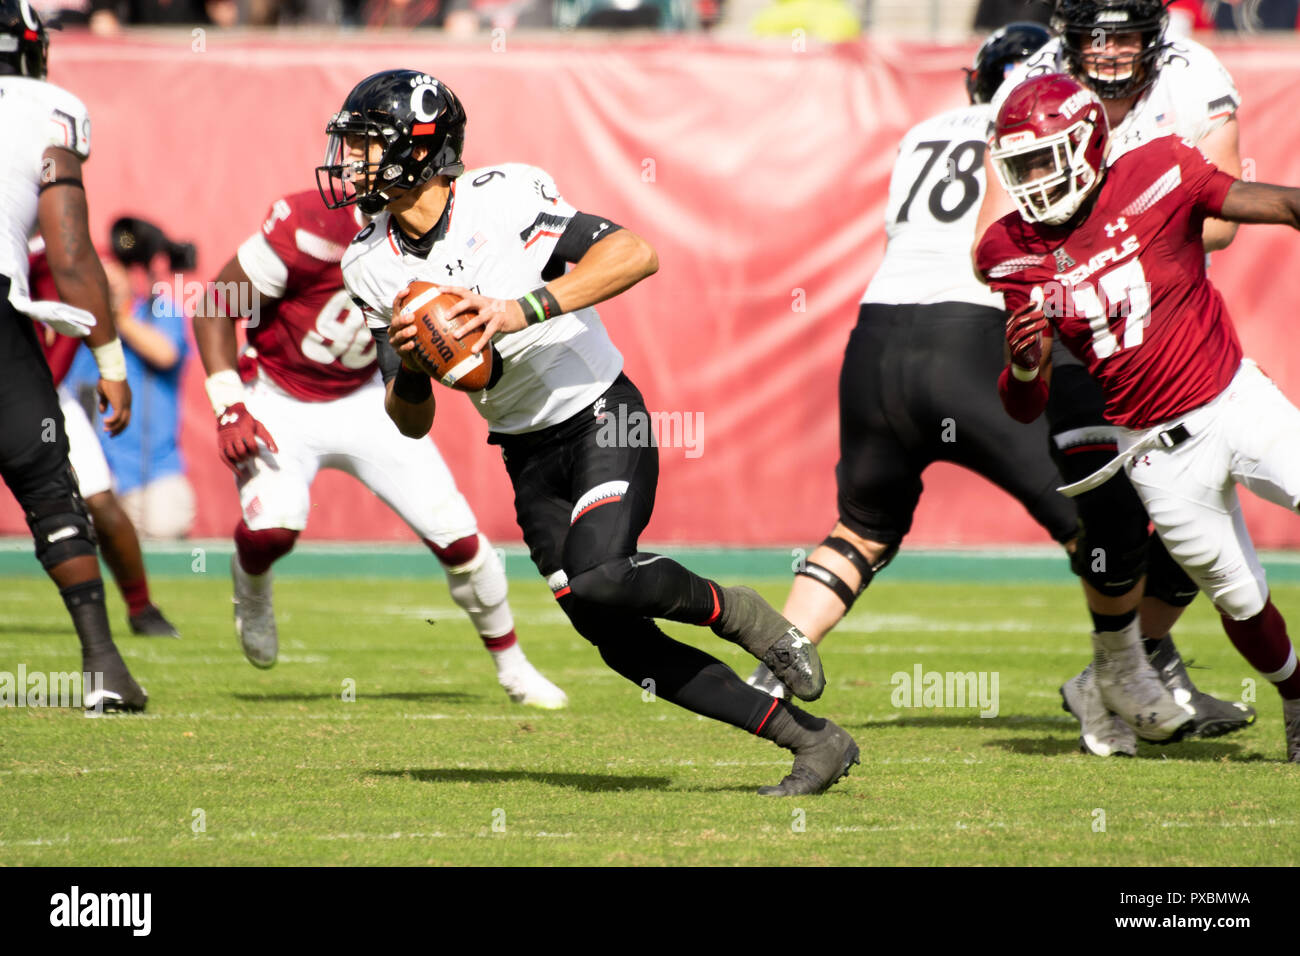 Philadelphia, Pennsylvania, USA. 20th Oct, 2018. Cincinnati's DESMOND RIDDER (9) in action during the game against Temple at Lincoln Financial Field in Philadelphia PA Temple handed Cincinnati their first loss of the season Credit: Ricky Fitchett/ZUMA Wire/Alamy Live News Stock Photo